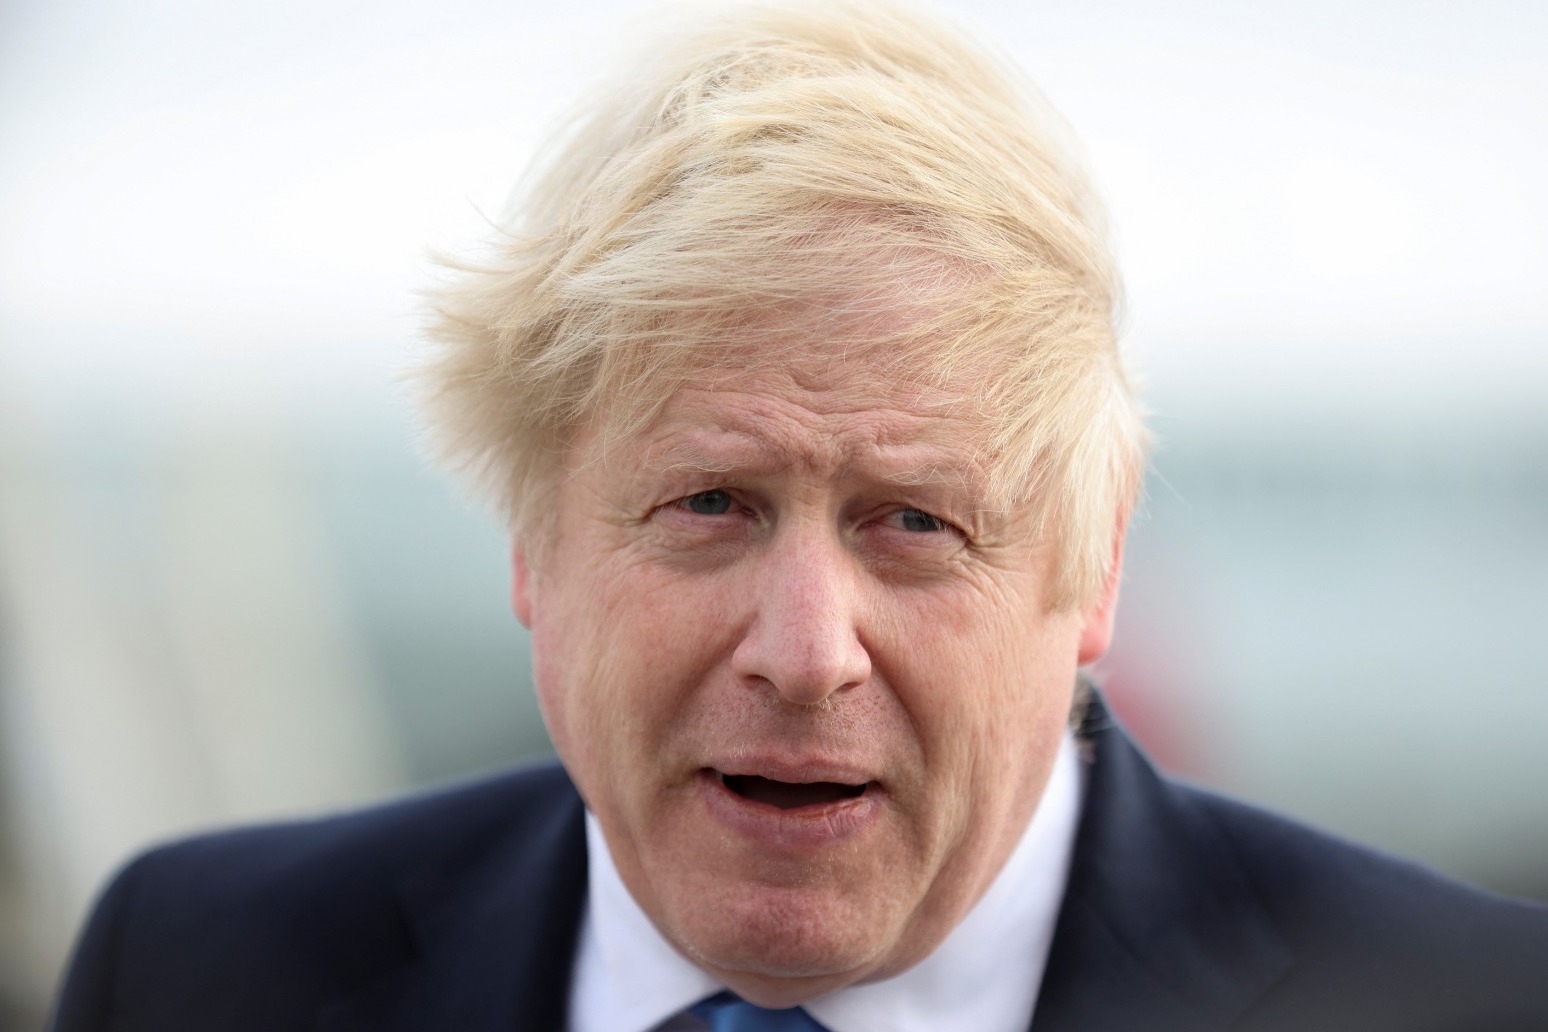 Johnson urges west to show Putin he will pay ‘high price’ for Ukraine invasion 